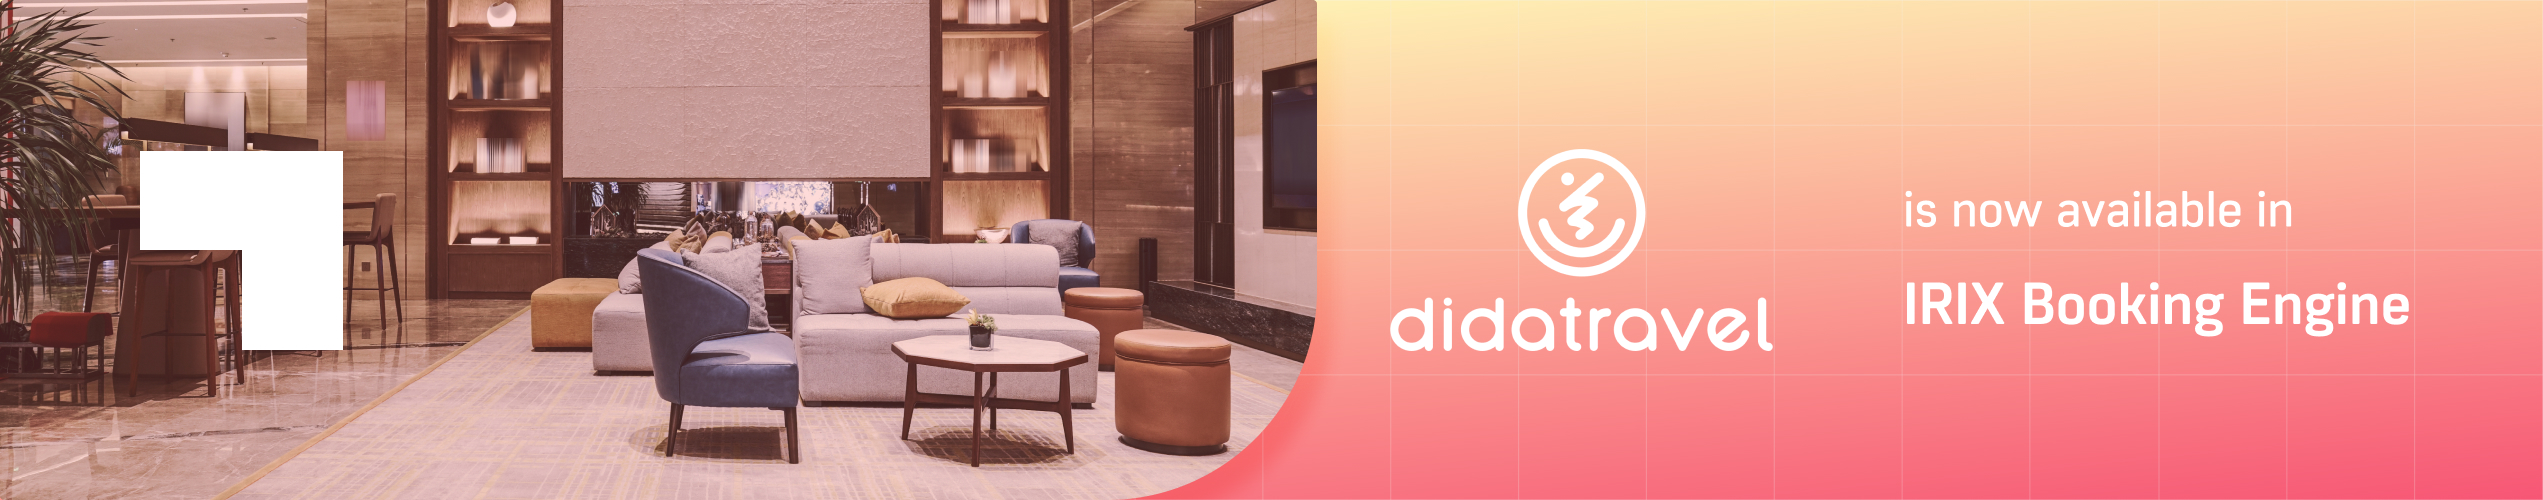 DidaTravel is available in IRIX Booking Engine